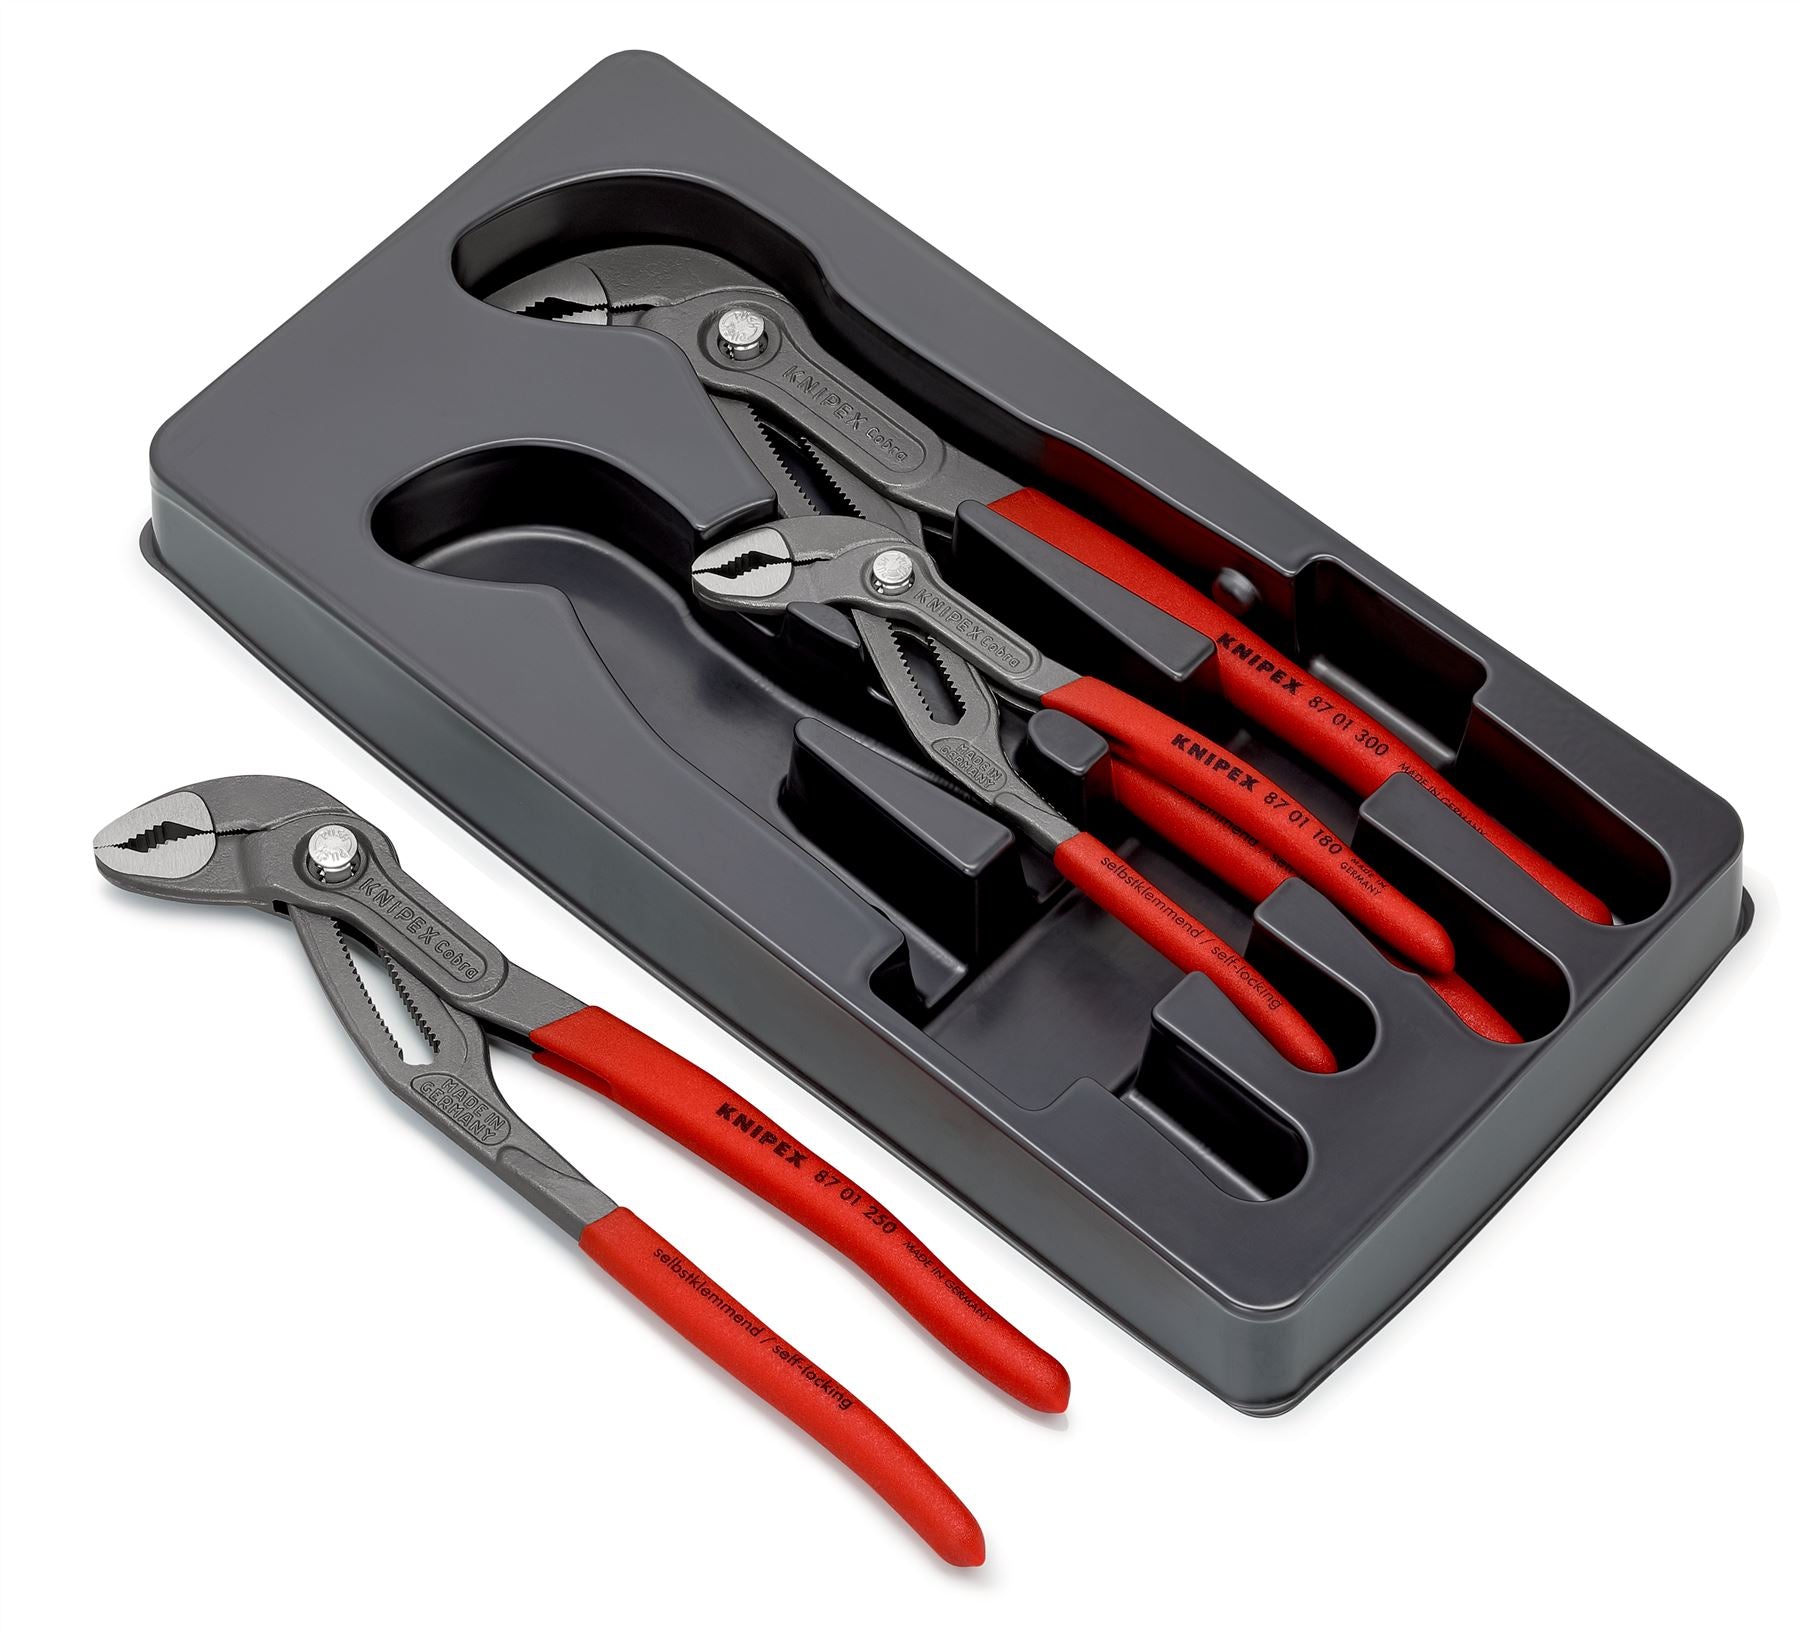 Knipex Cobra Pliers Set 3 Piece 180mm 250mm 300mm Plier in Tray 00 20 09 V02